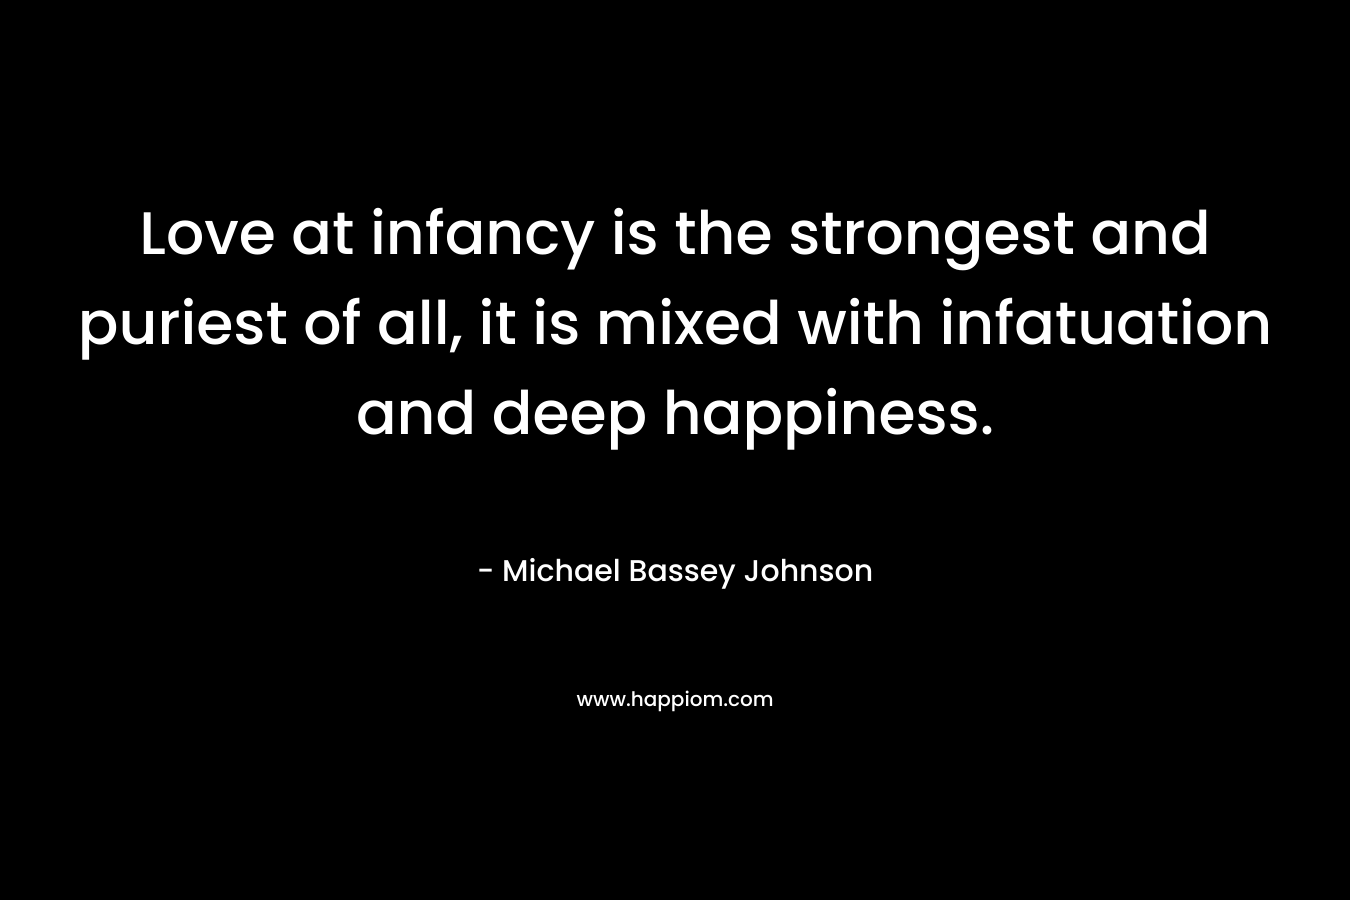 Love at infancy is the strongest and puriest of all, it is mixed with infatuation and deep happiness. – Michael Bassey Johnson